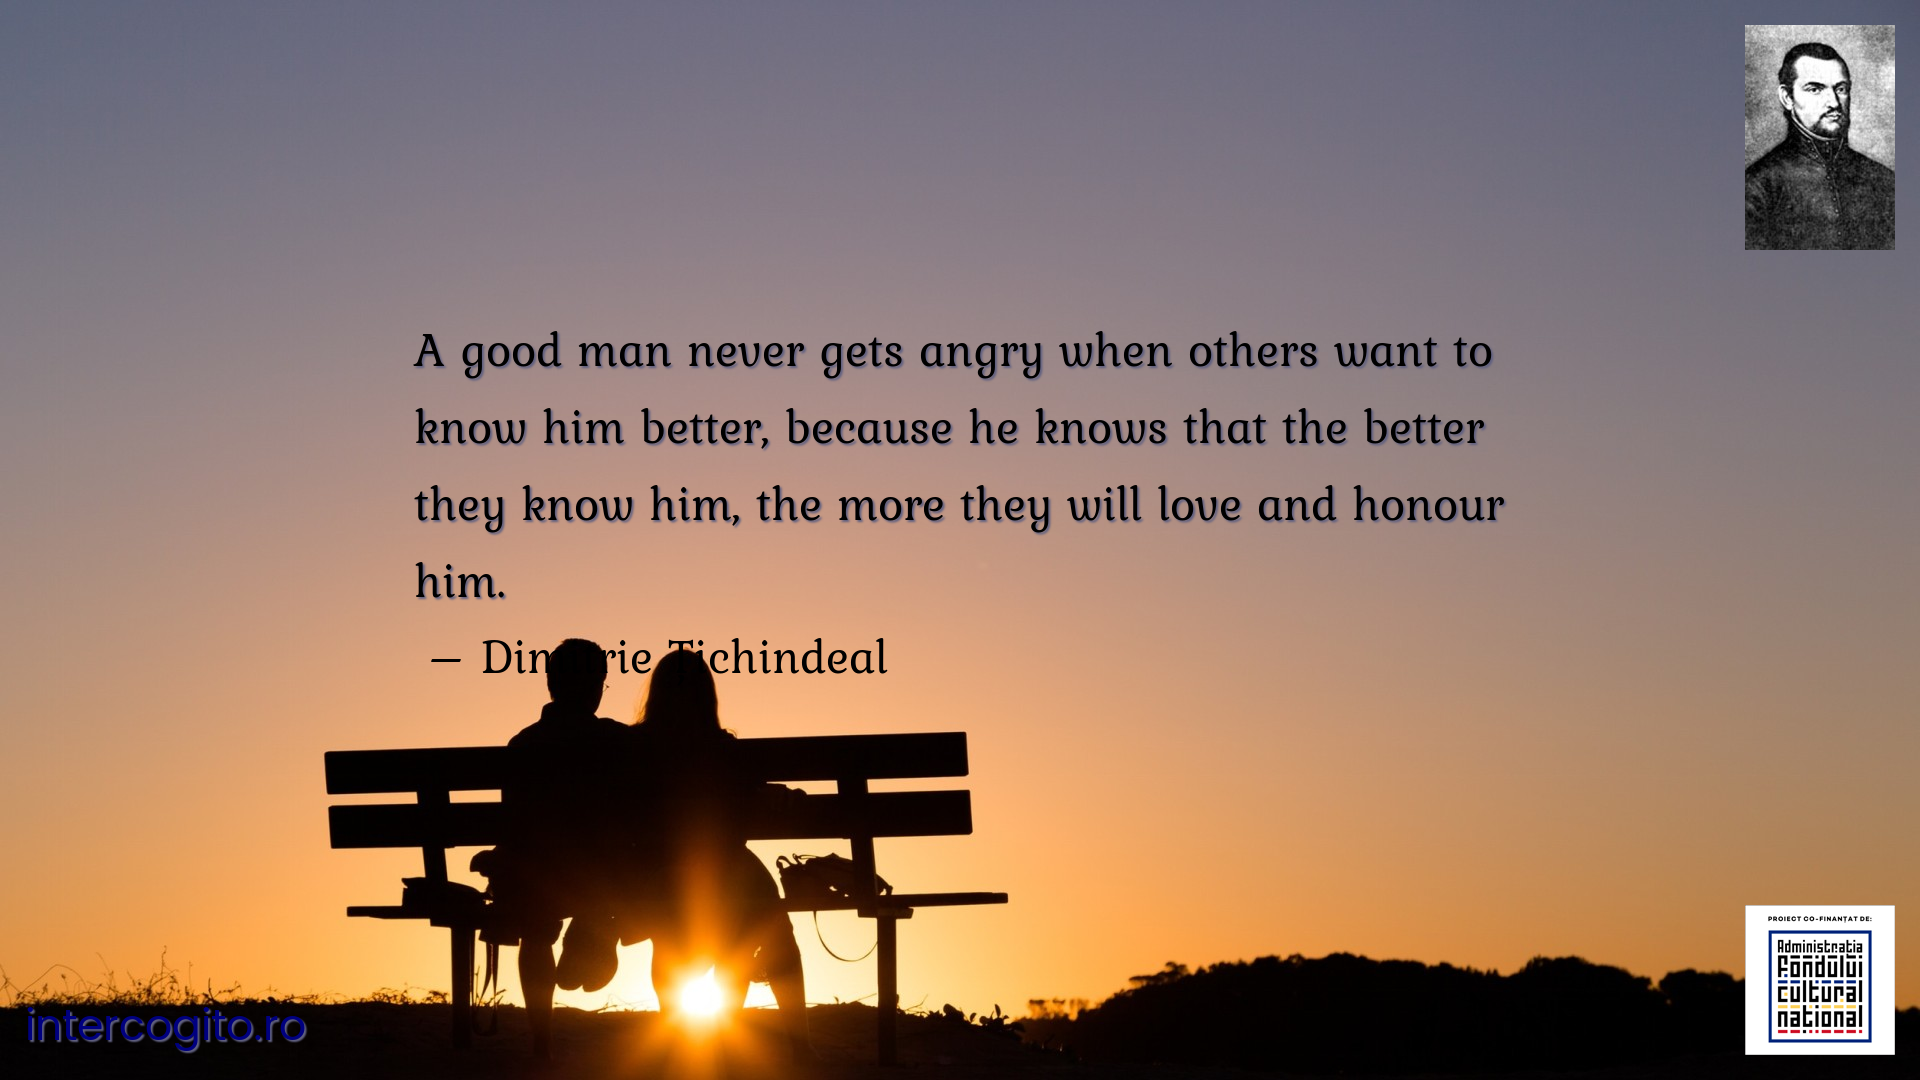 A good man never gets angry when others want to know him better, because he knows that the better they know him, the more they will love and honour him.